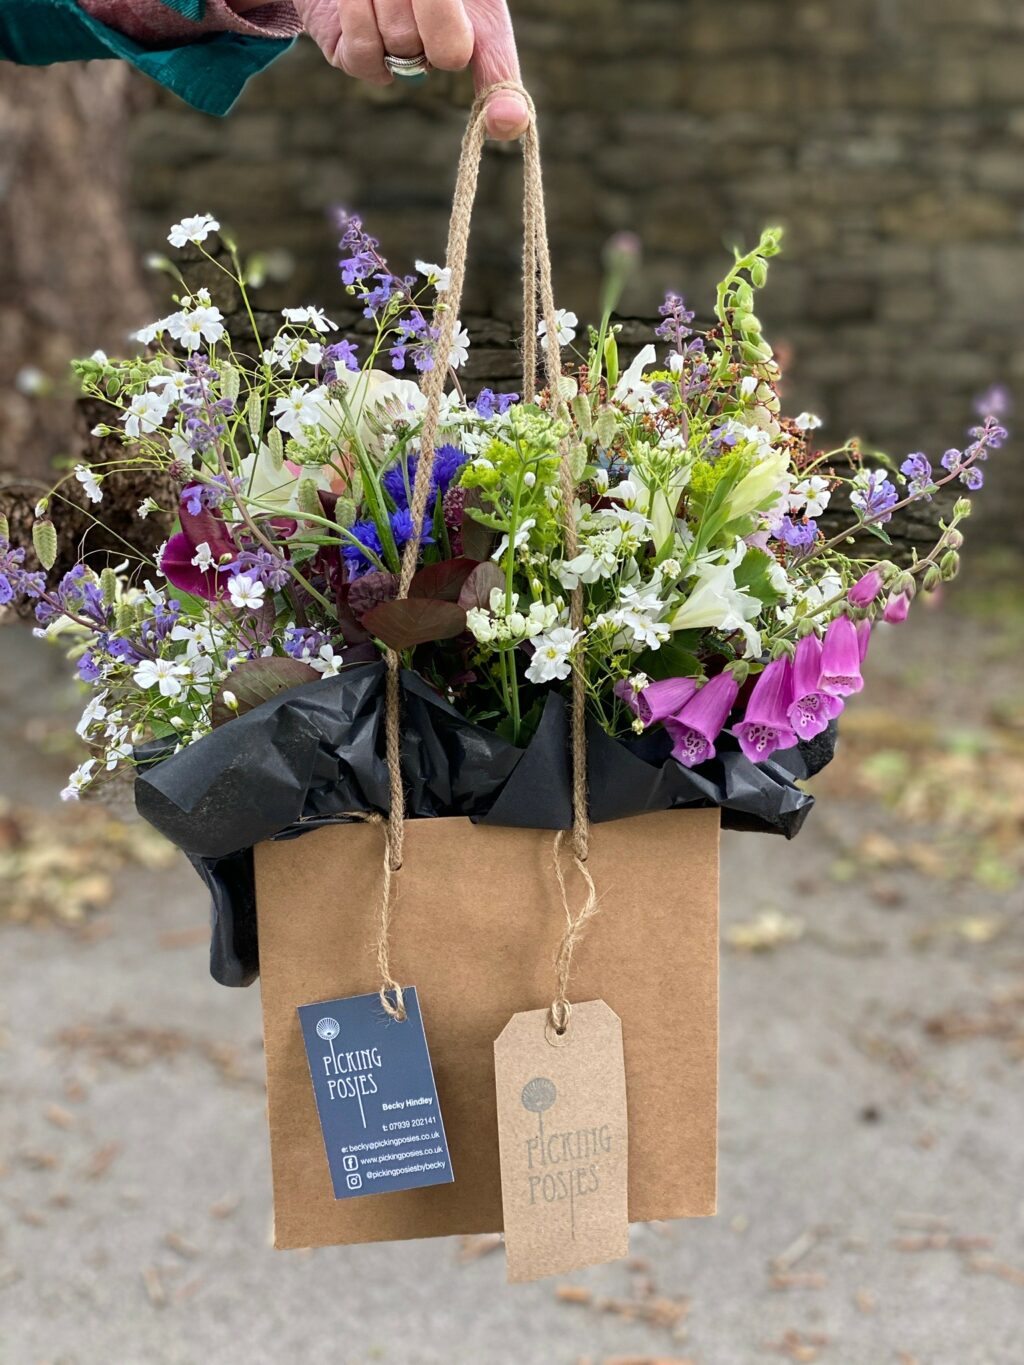 Posies of British cut flowers gathered in a small gift bag ready for local delivery by Becky of Picking Posies, Lancashire.